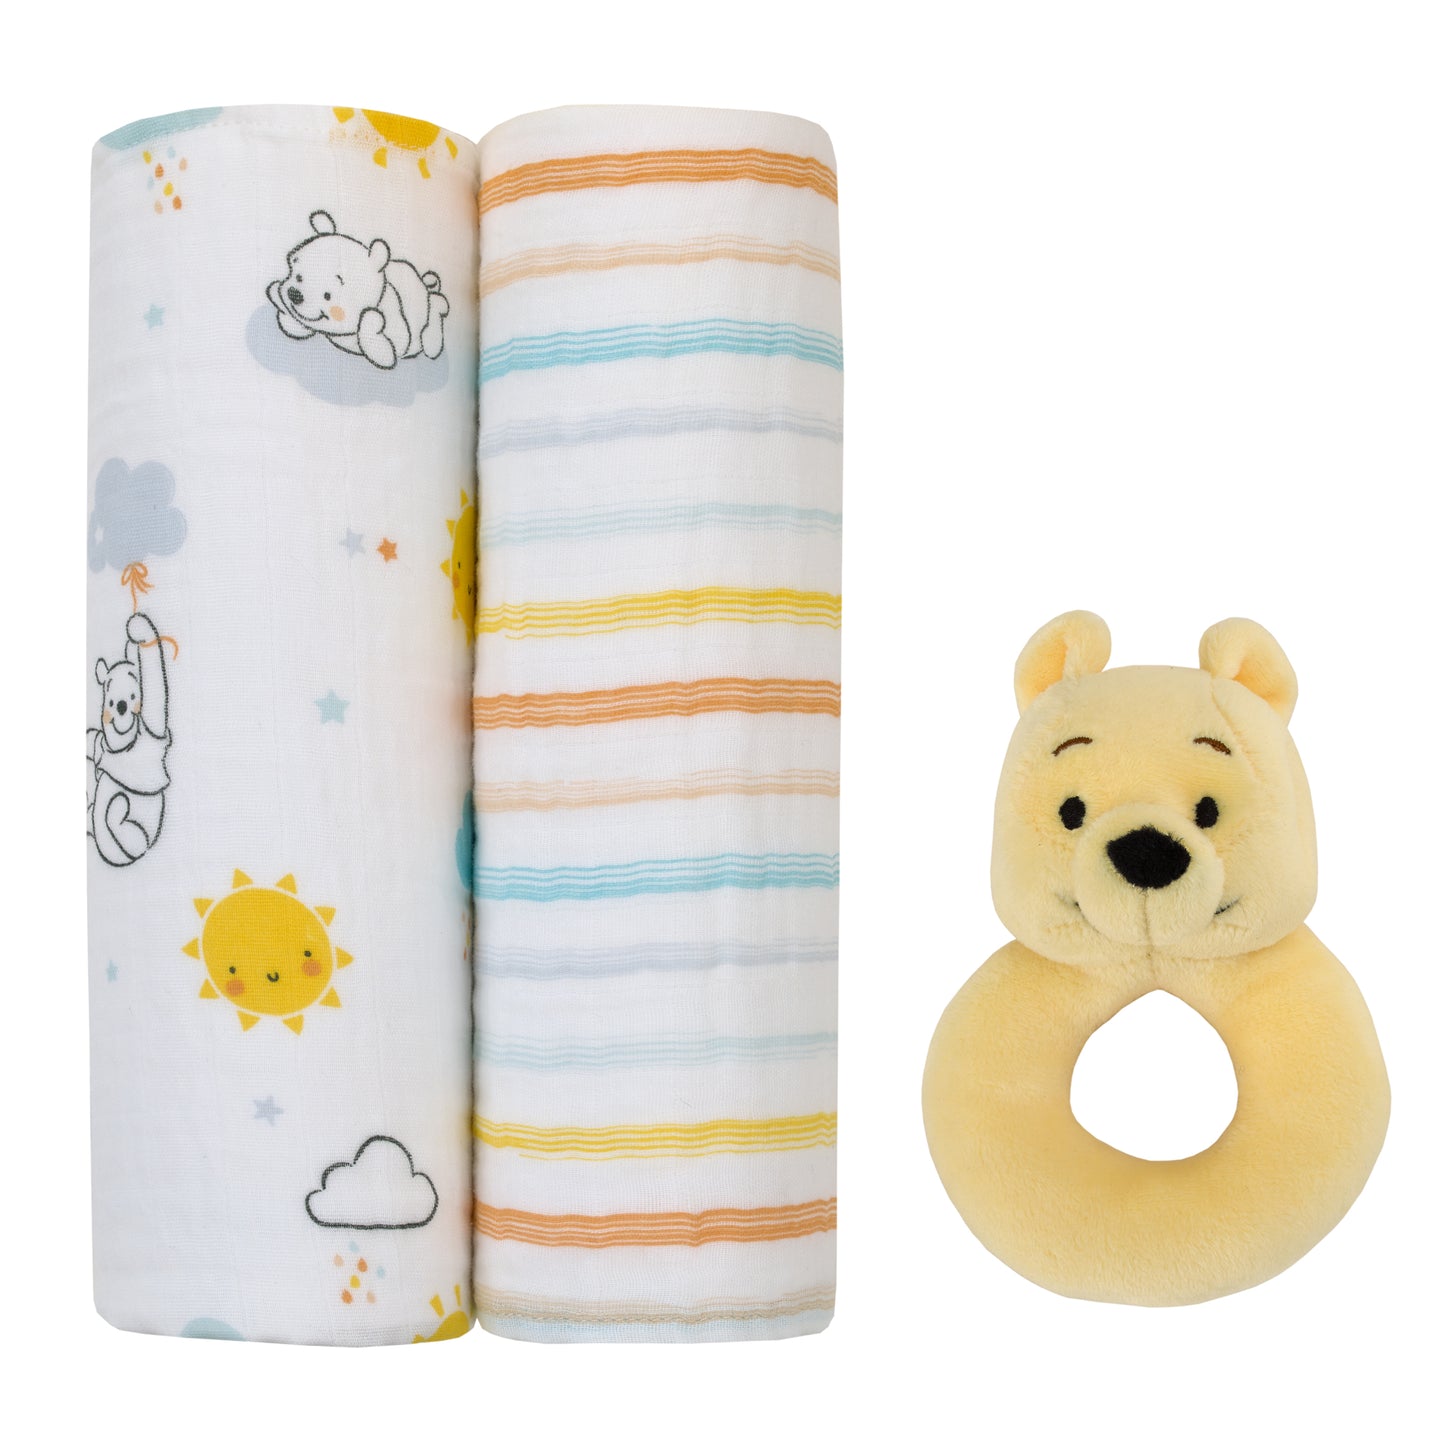 Disney Winnie the Pooh White, Yellow, and Aqua 2Pk 100% Cotton Muslin Swaddles with Plush Rattle